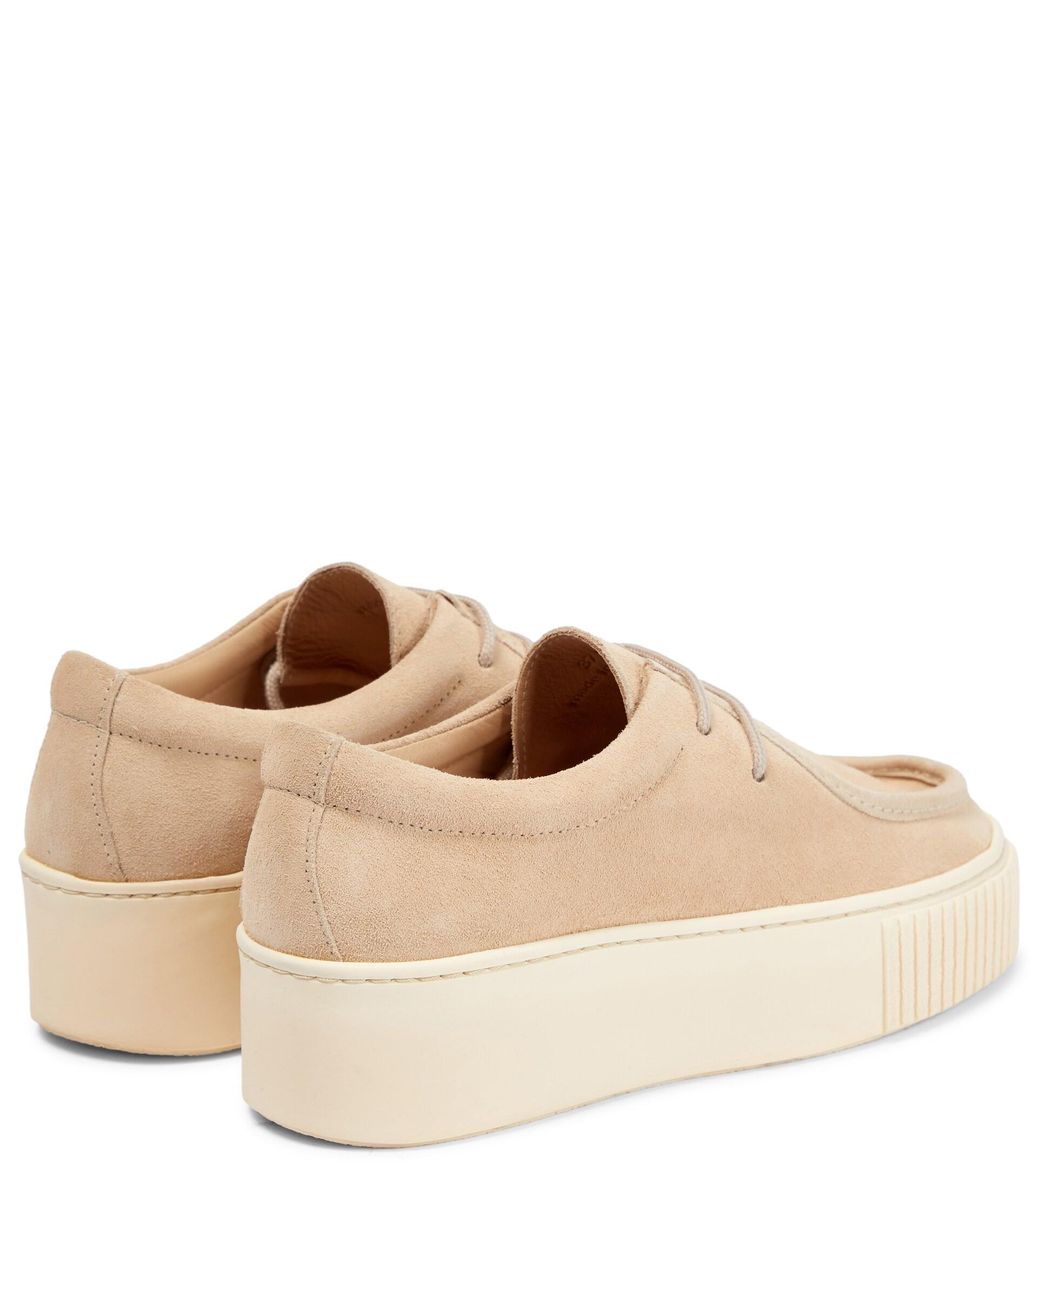 Sneakers Fontaina in suede con platform Mytheresa Donna Scarpe Scarpe con plateau Trainers 